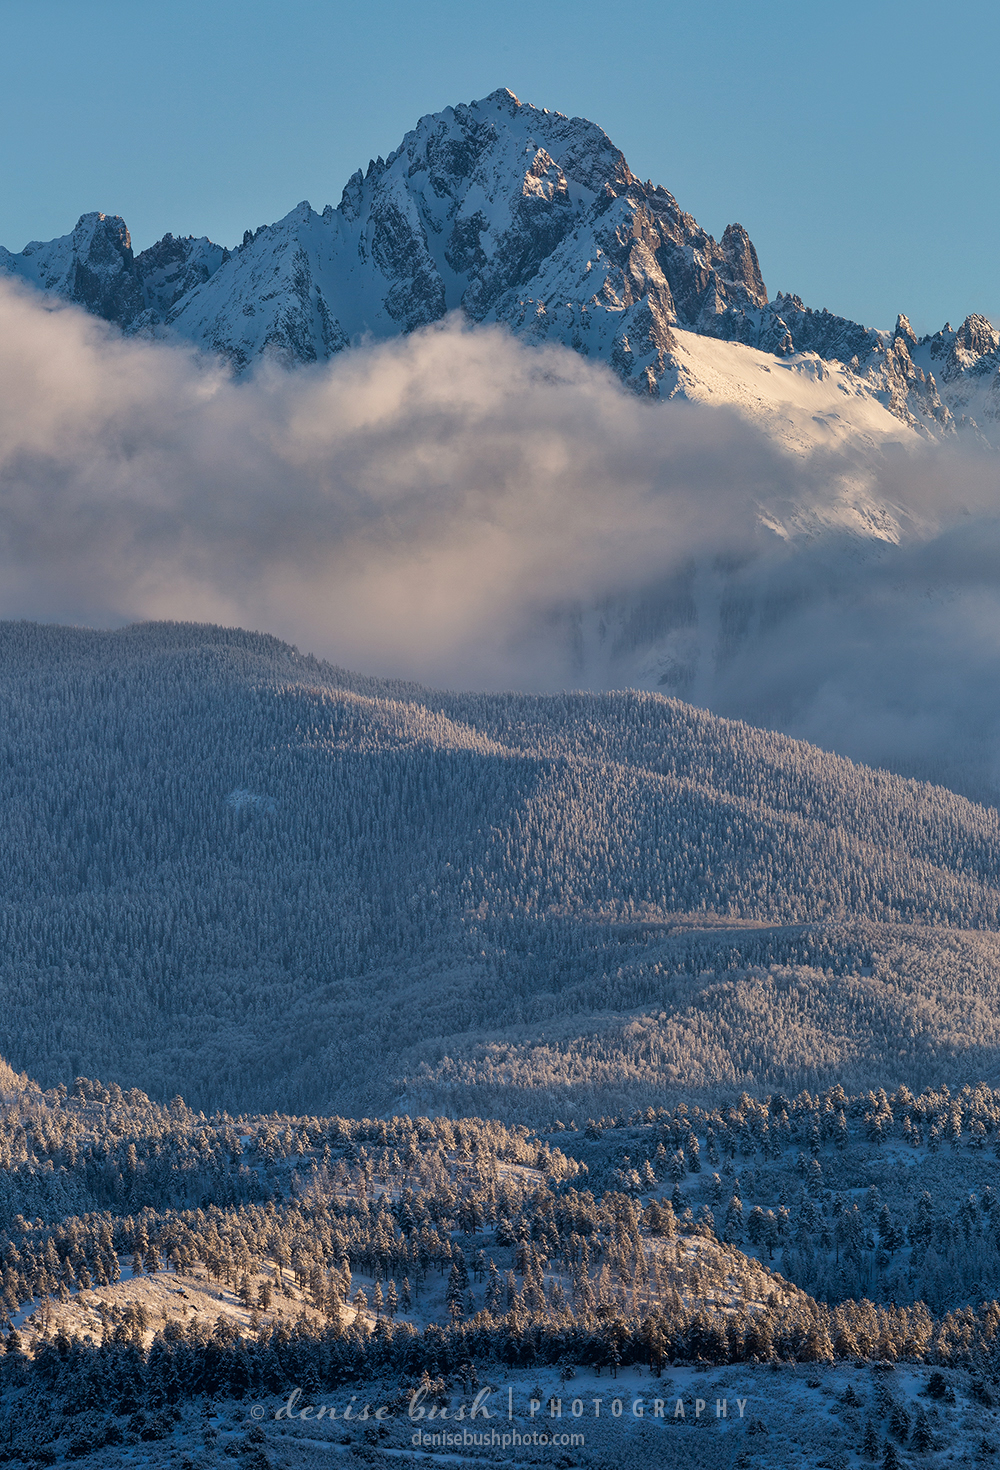 After a fresh coating of snow Mount Sneffels stands out above the clouds!